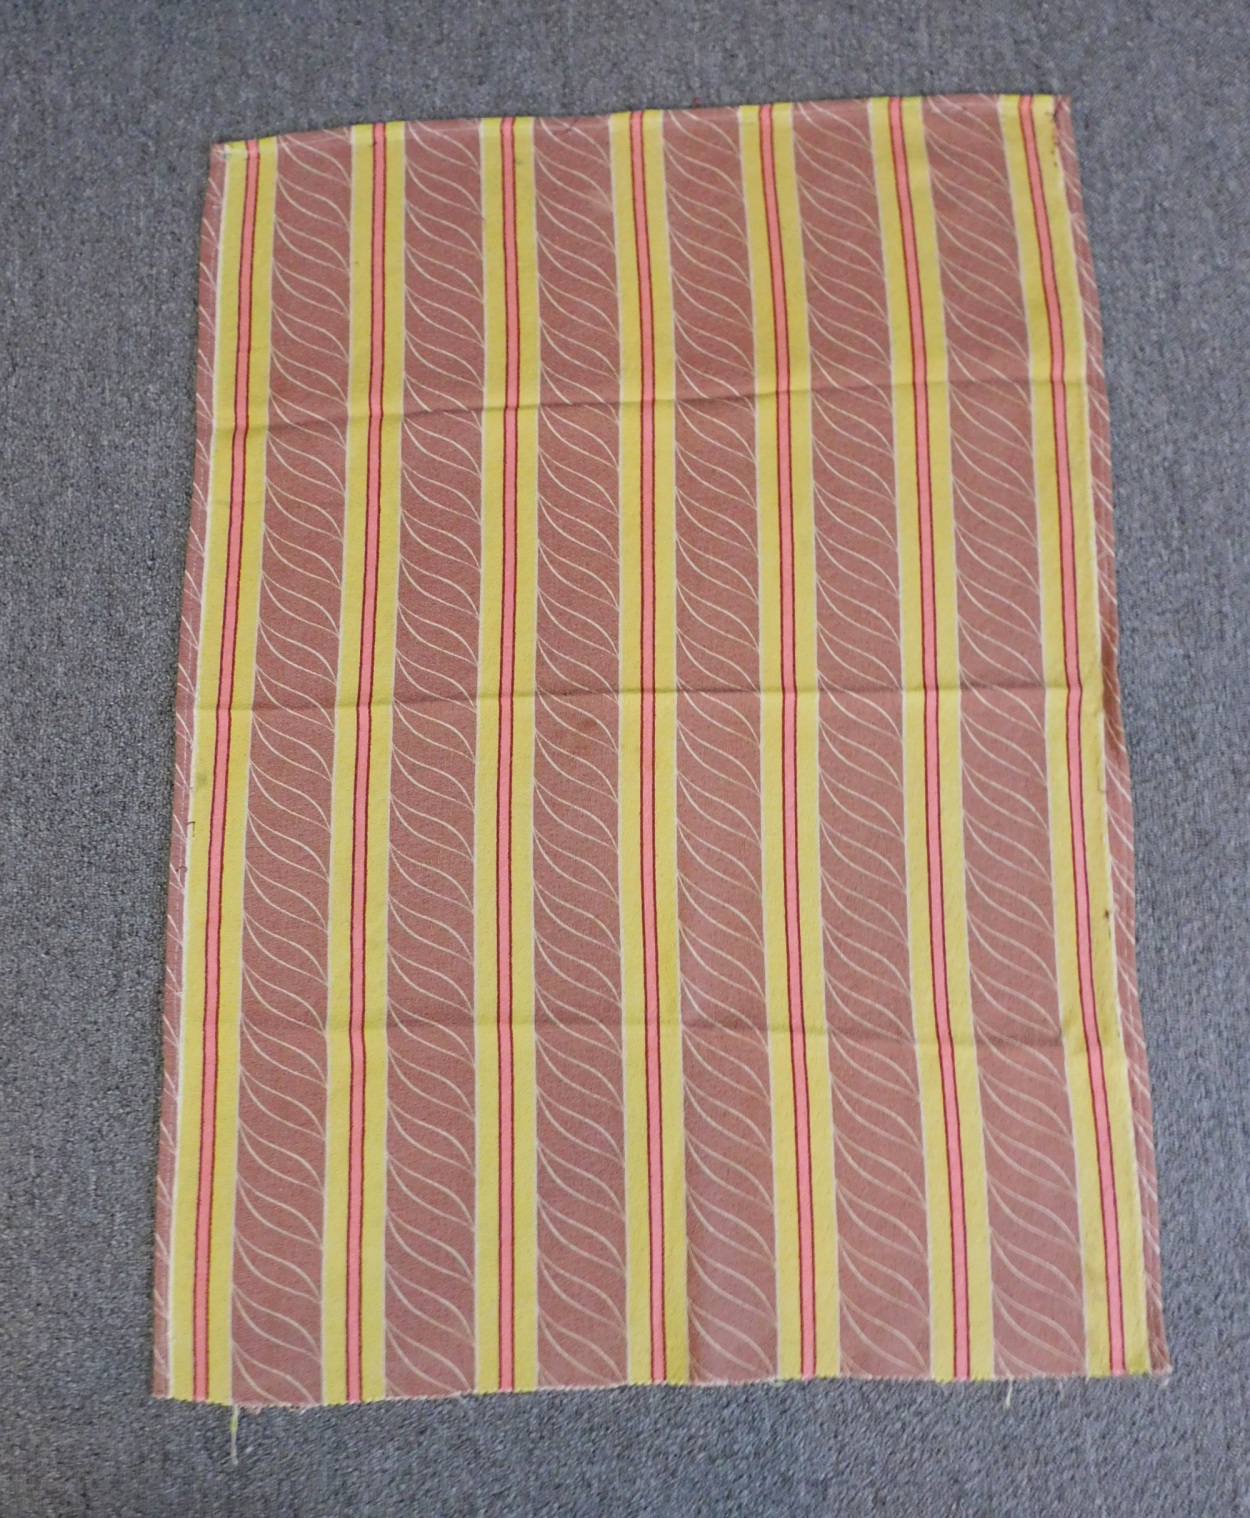 Vintage 1930s Barkcloth Fabric Remnant, 24x33 inches Mauve & Yellow ...